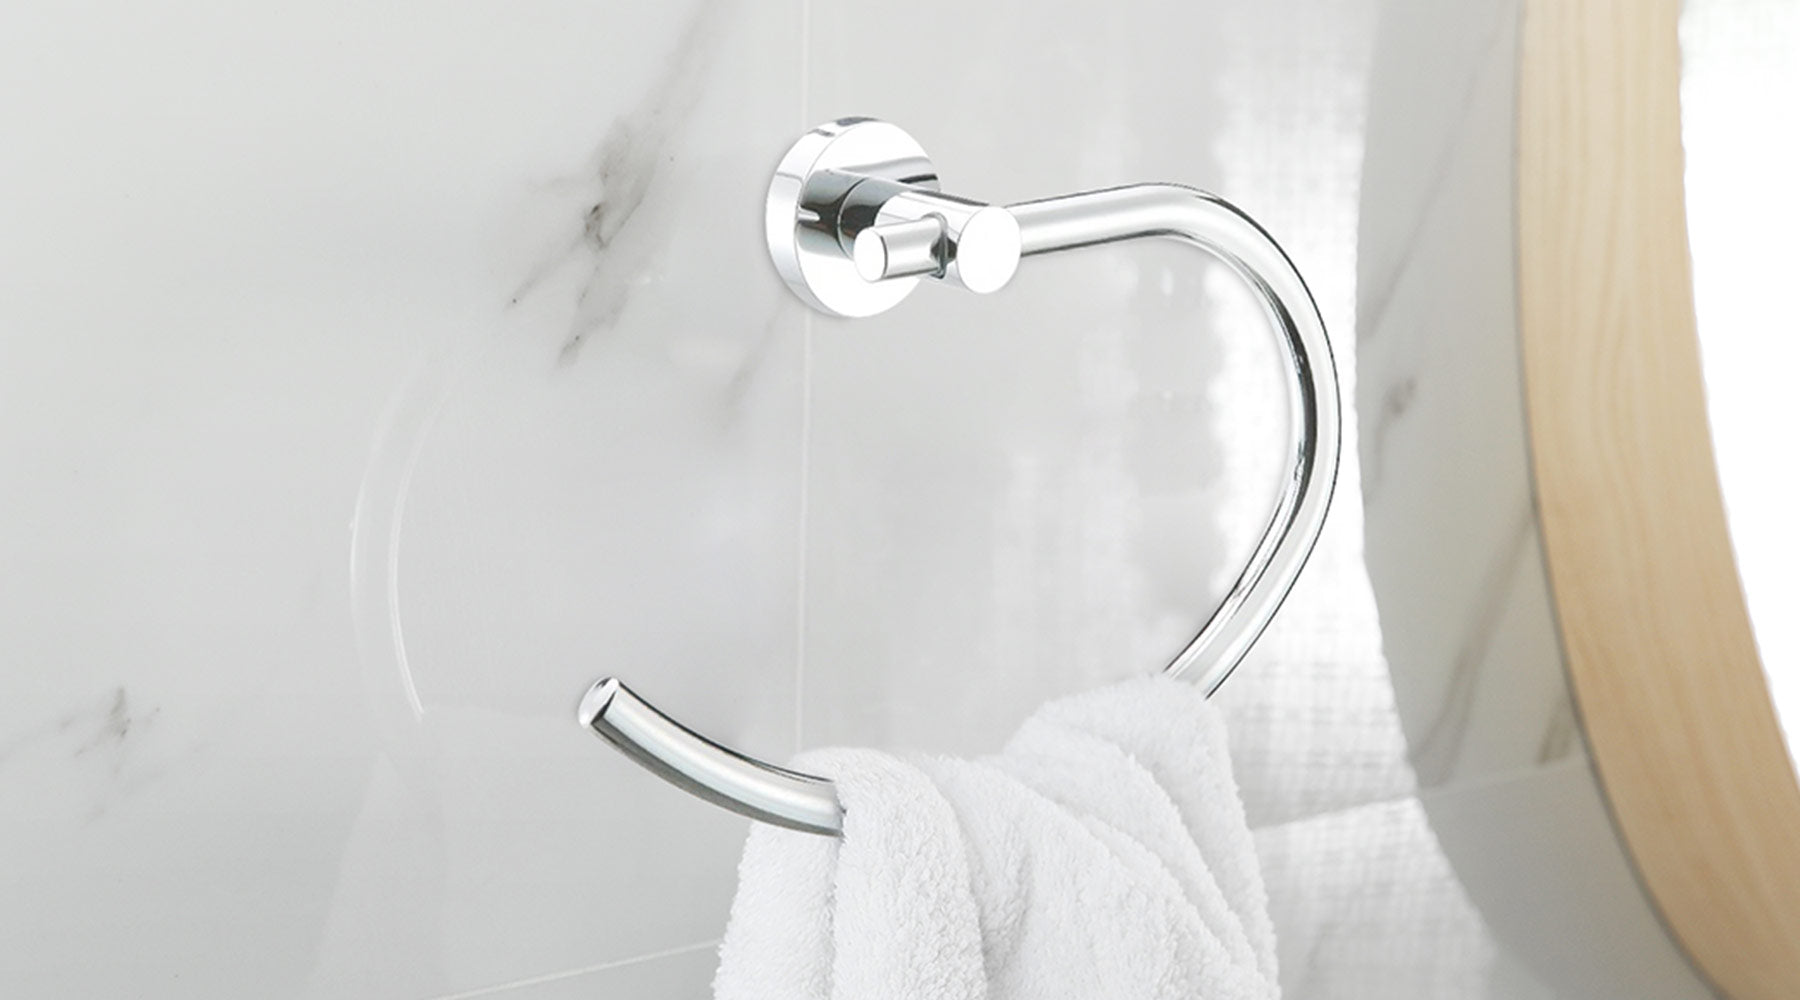 How to Install Towel Ring In 5 Easy Steps